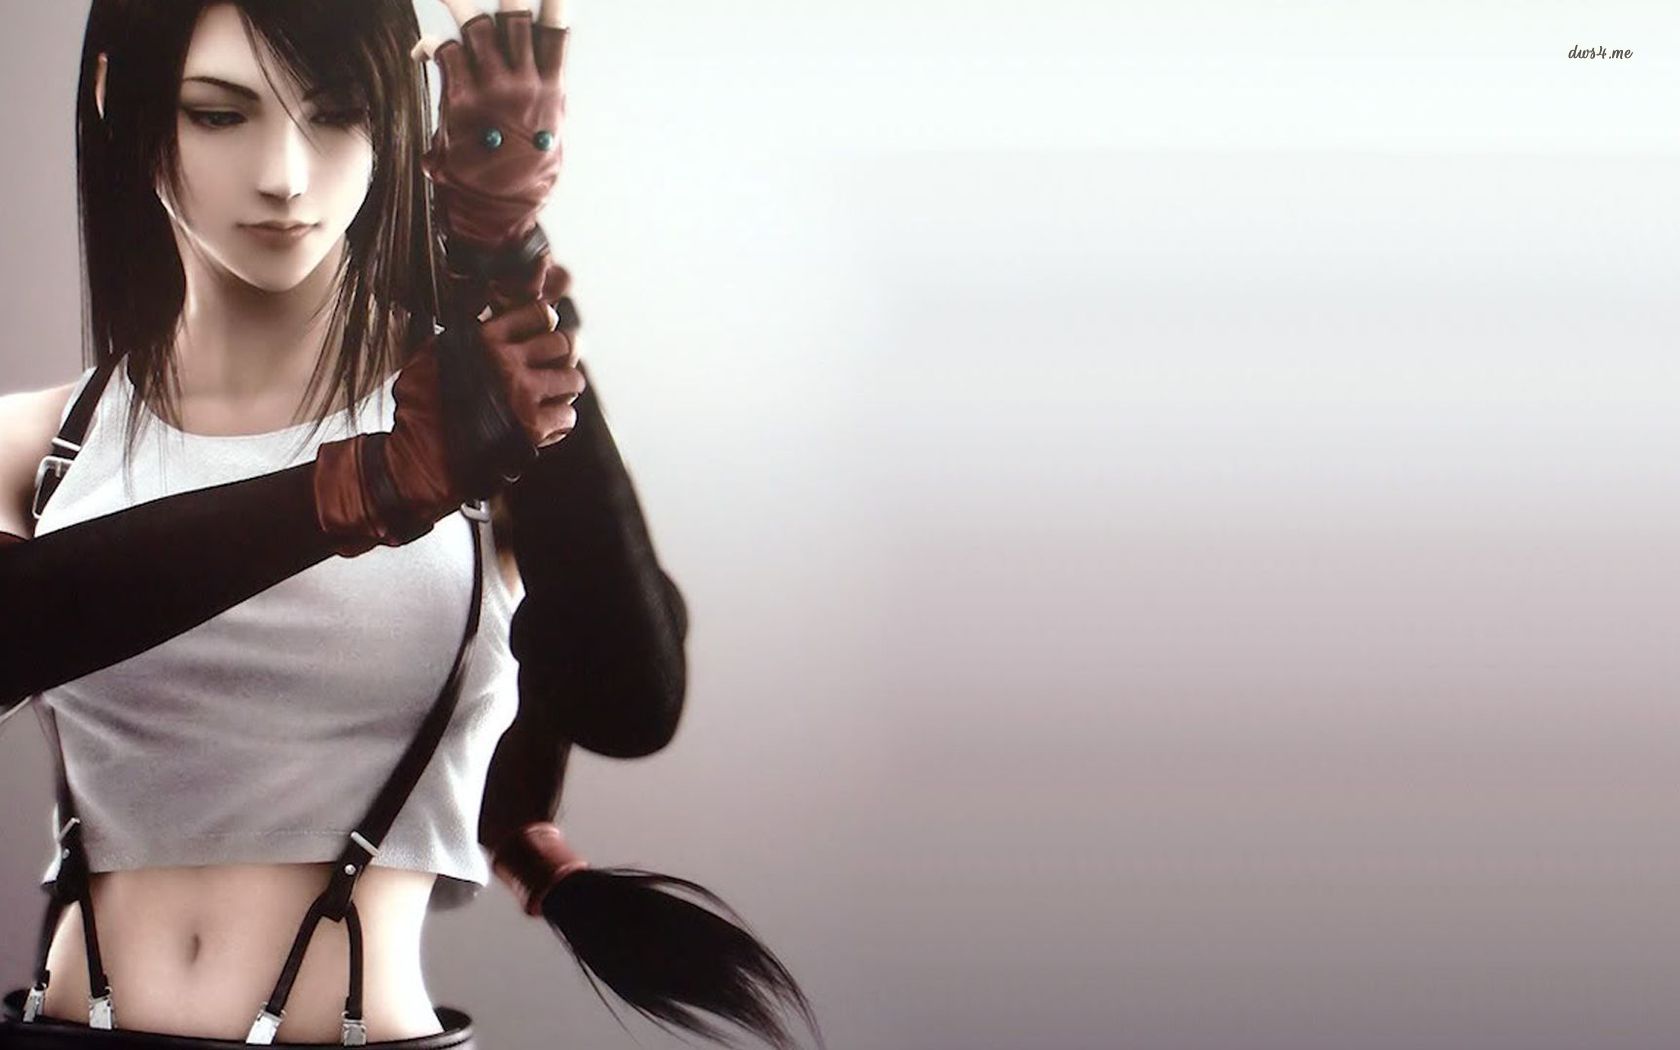 Collection of Final Fantasy Tifa Wallpaper on HDWallpapers